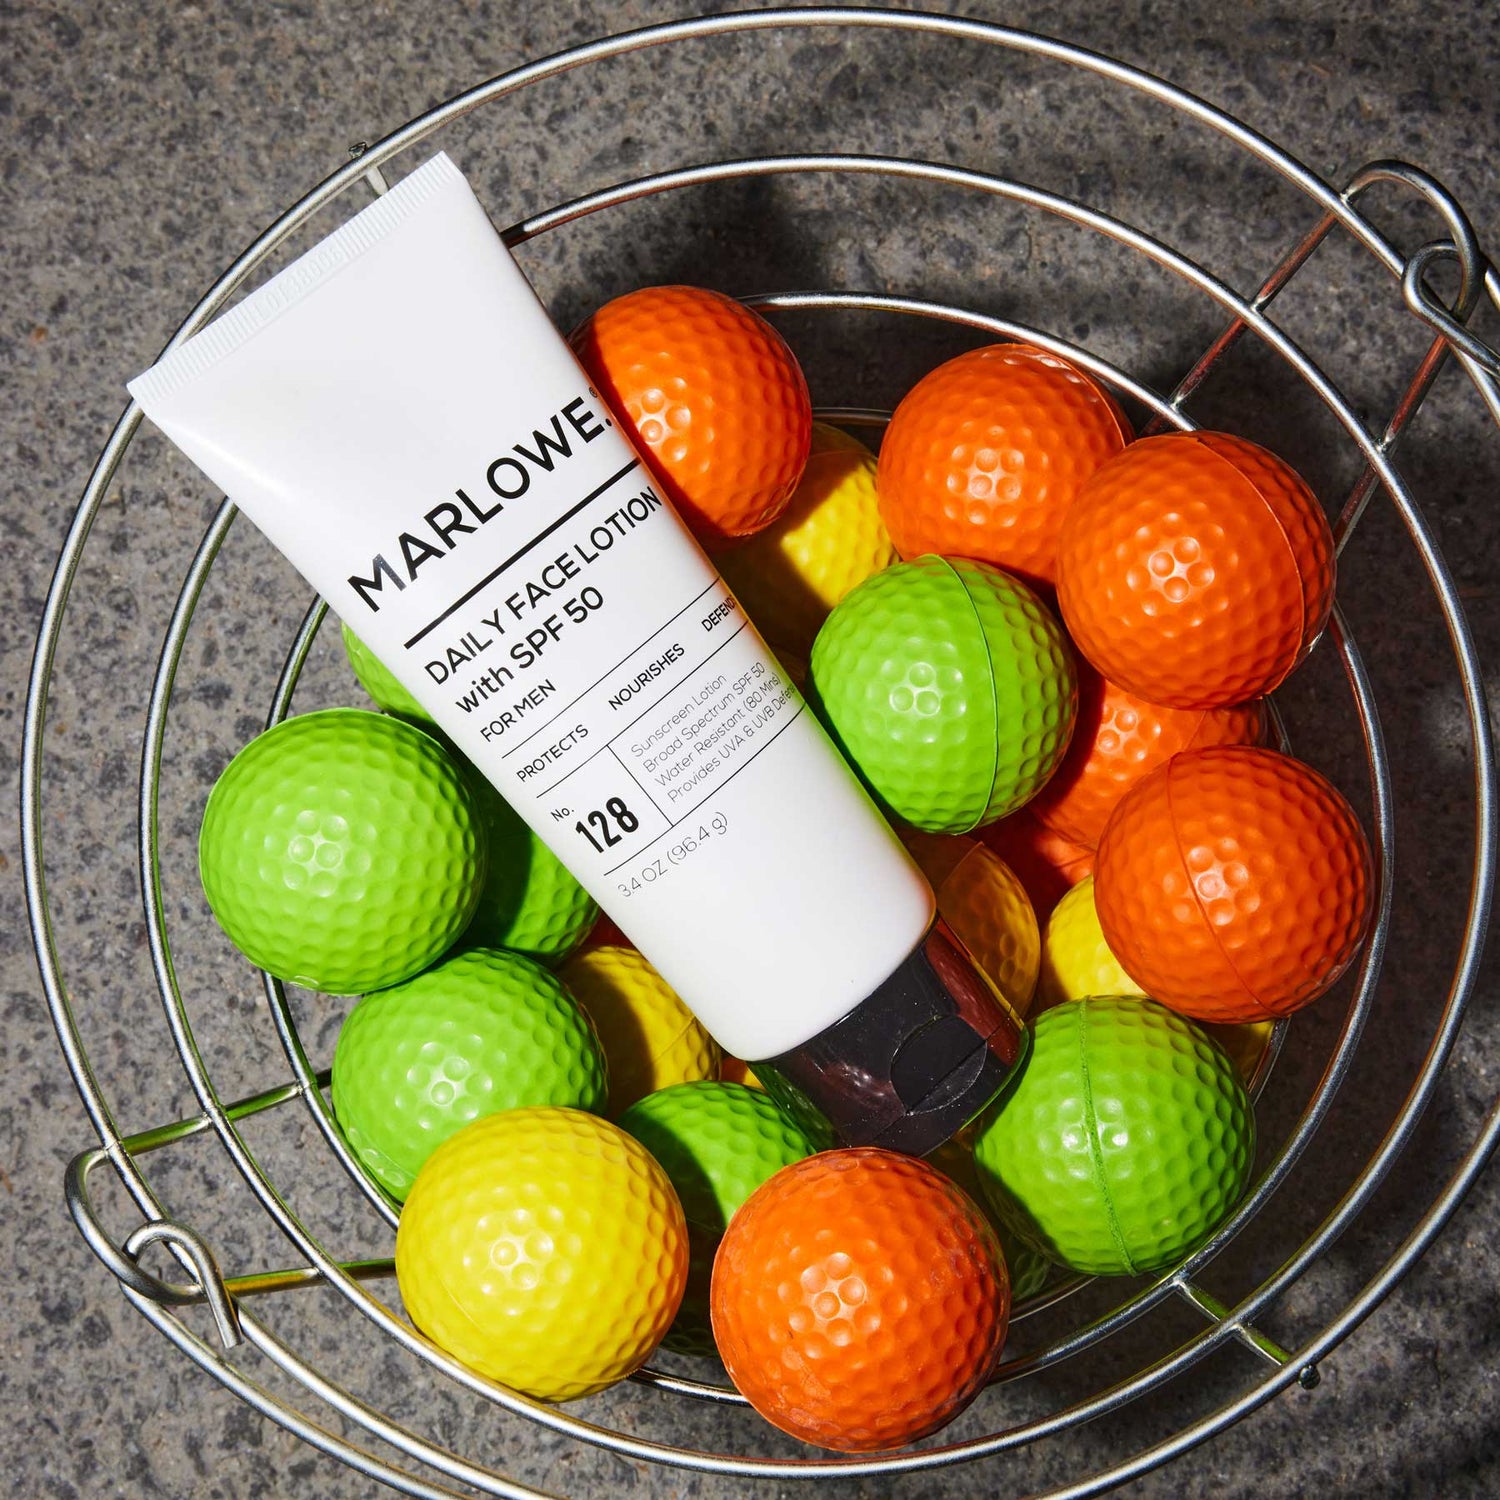 MARLOWE. Face Lotion with SPF in bucket with golf balls